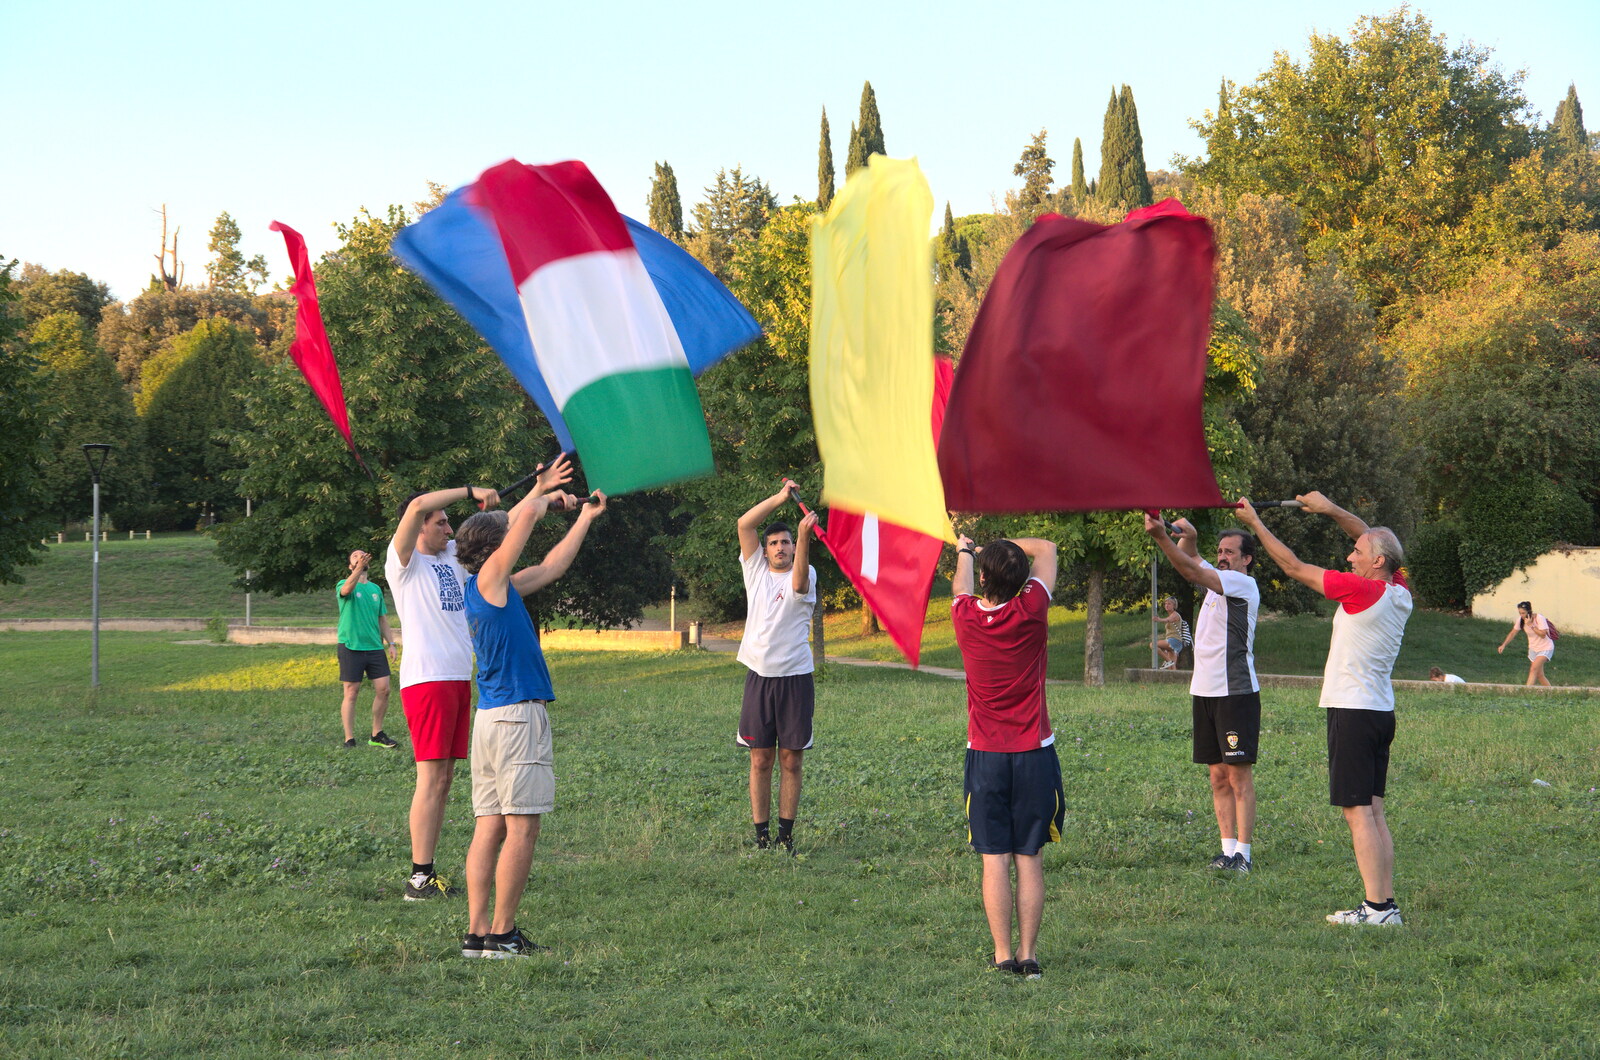 The Flags of Arezzo, Tuscany, Italy - 28th August 2022: More flag-swirling practice